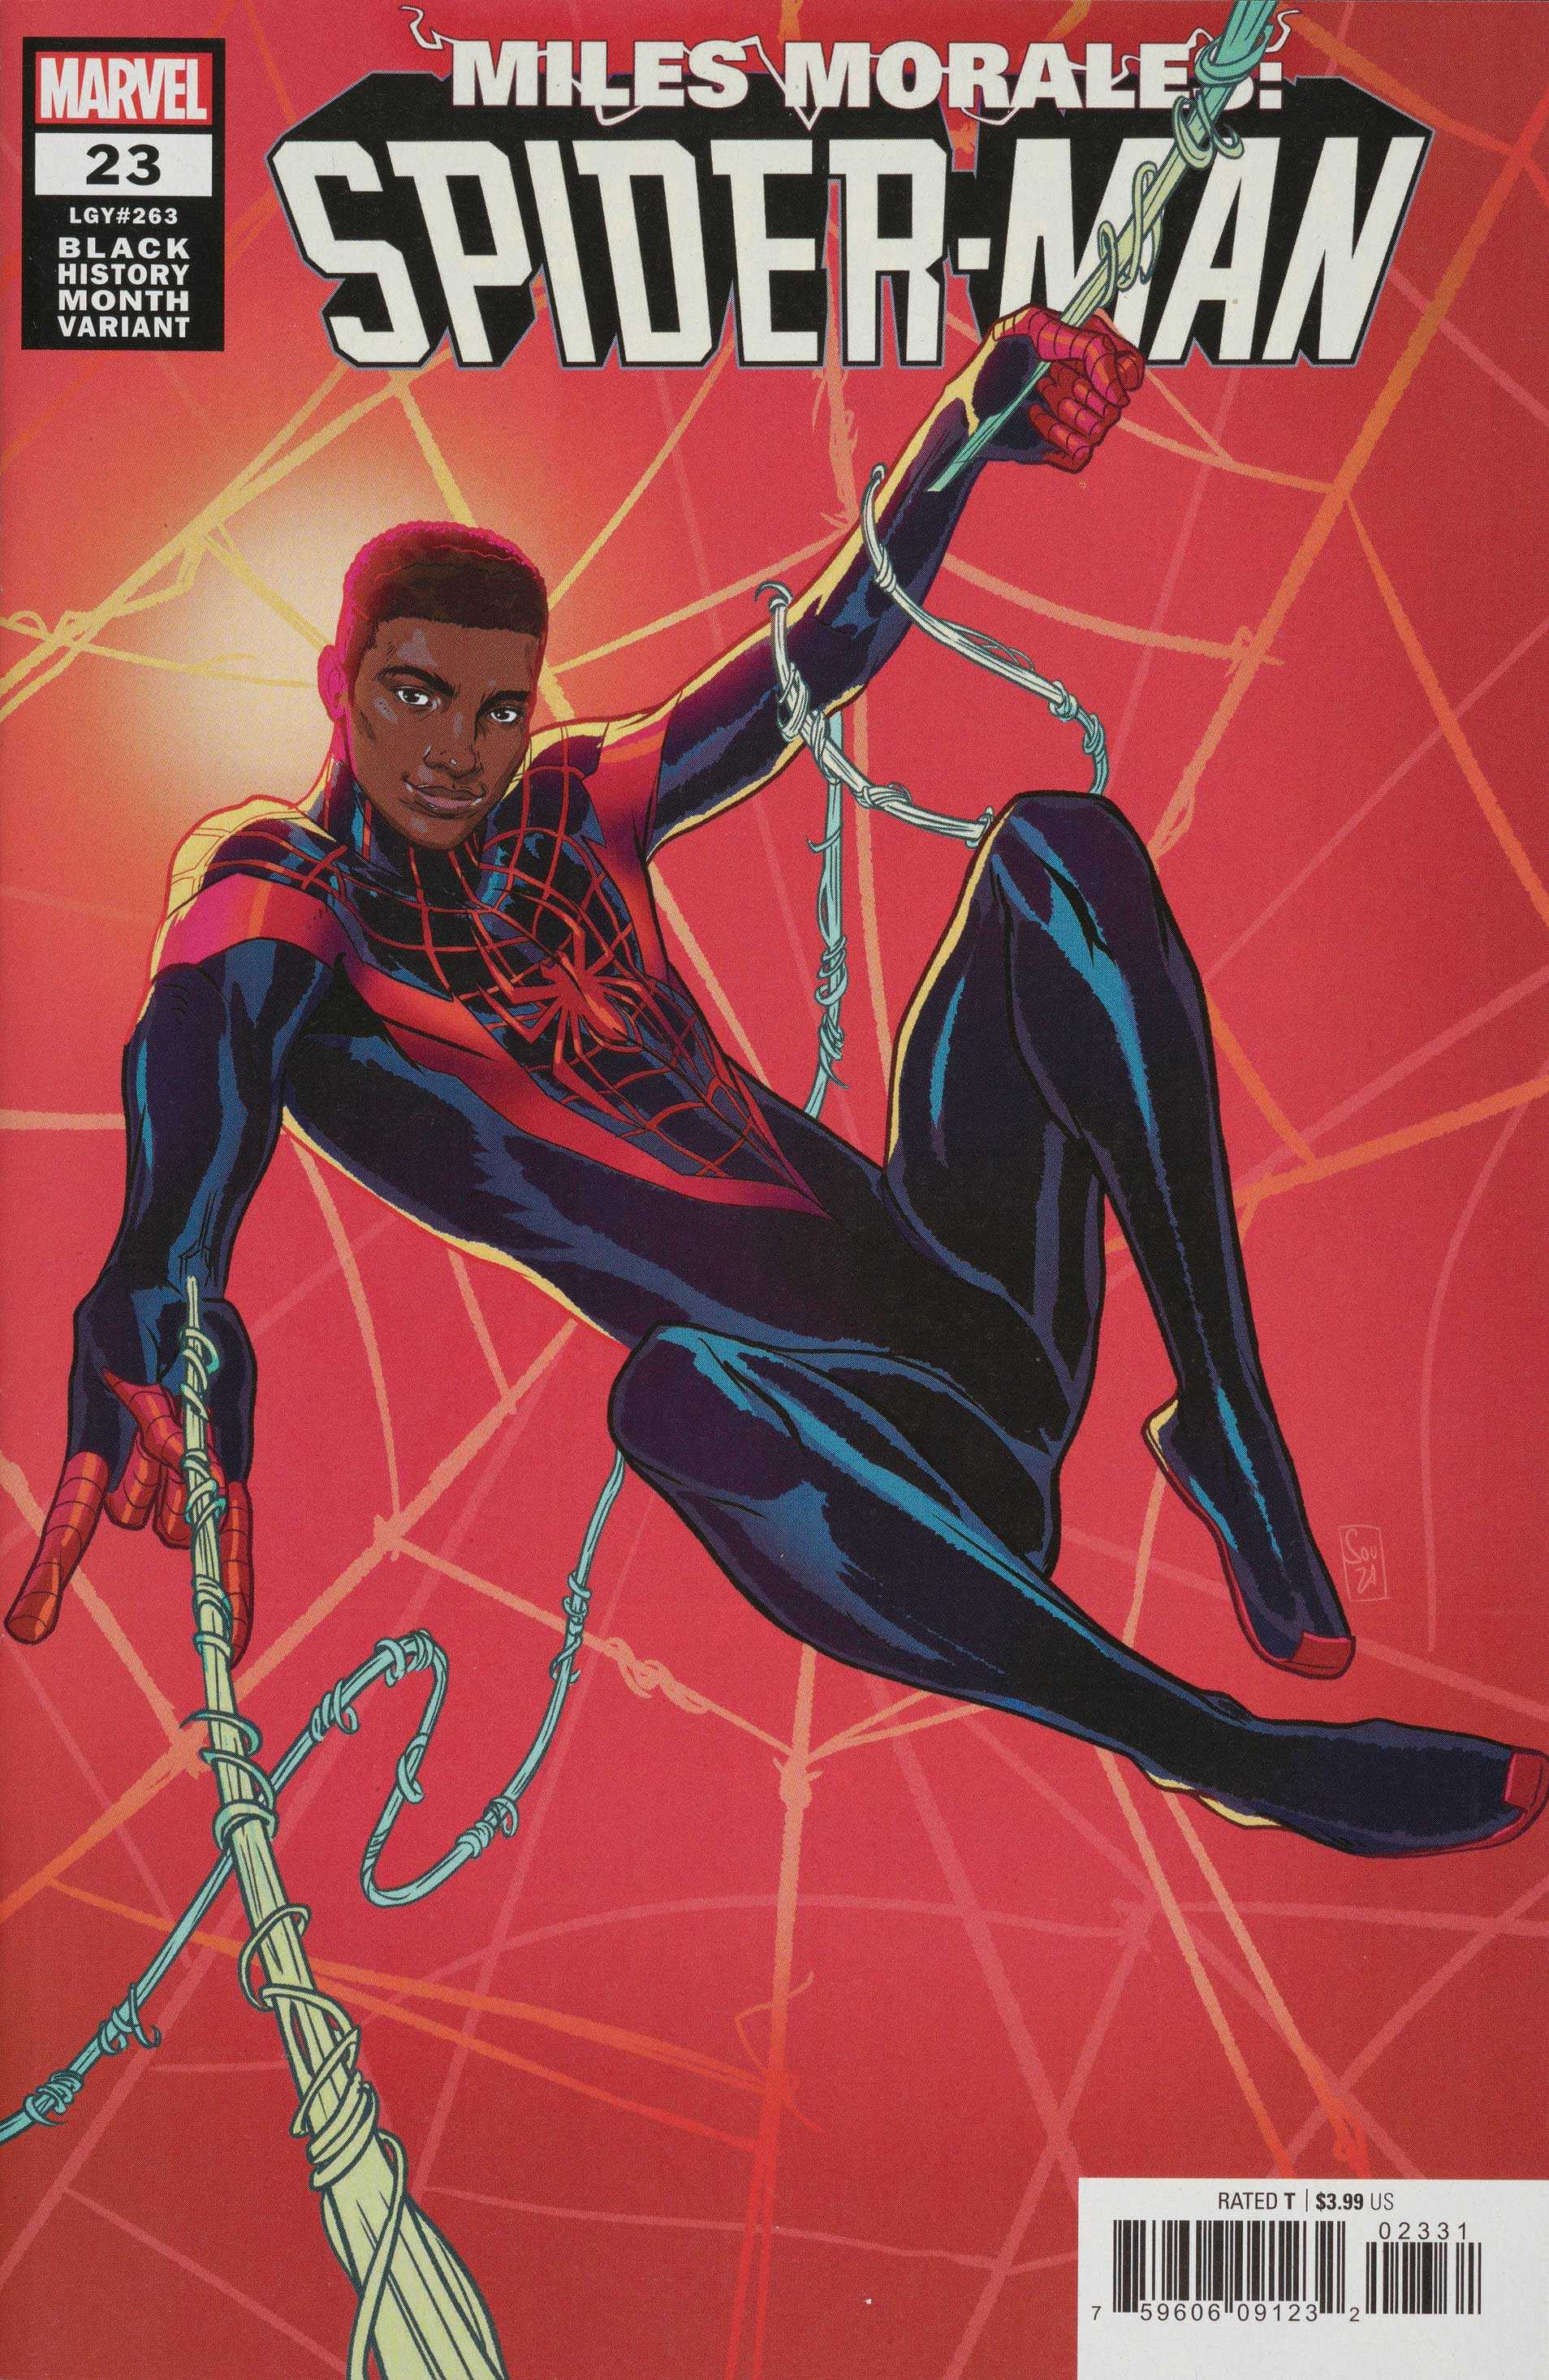 Spider-man comic book cover. Spider-man is swing throw on his webs against a red webby background.